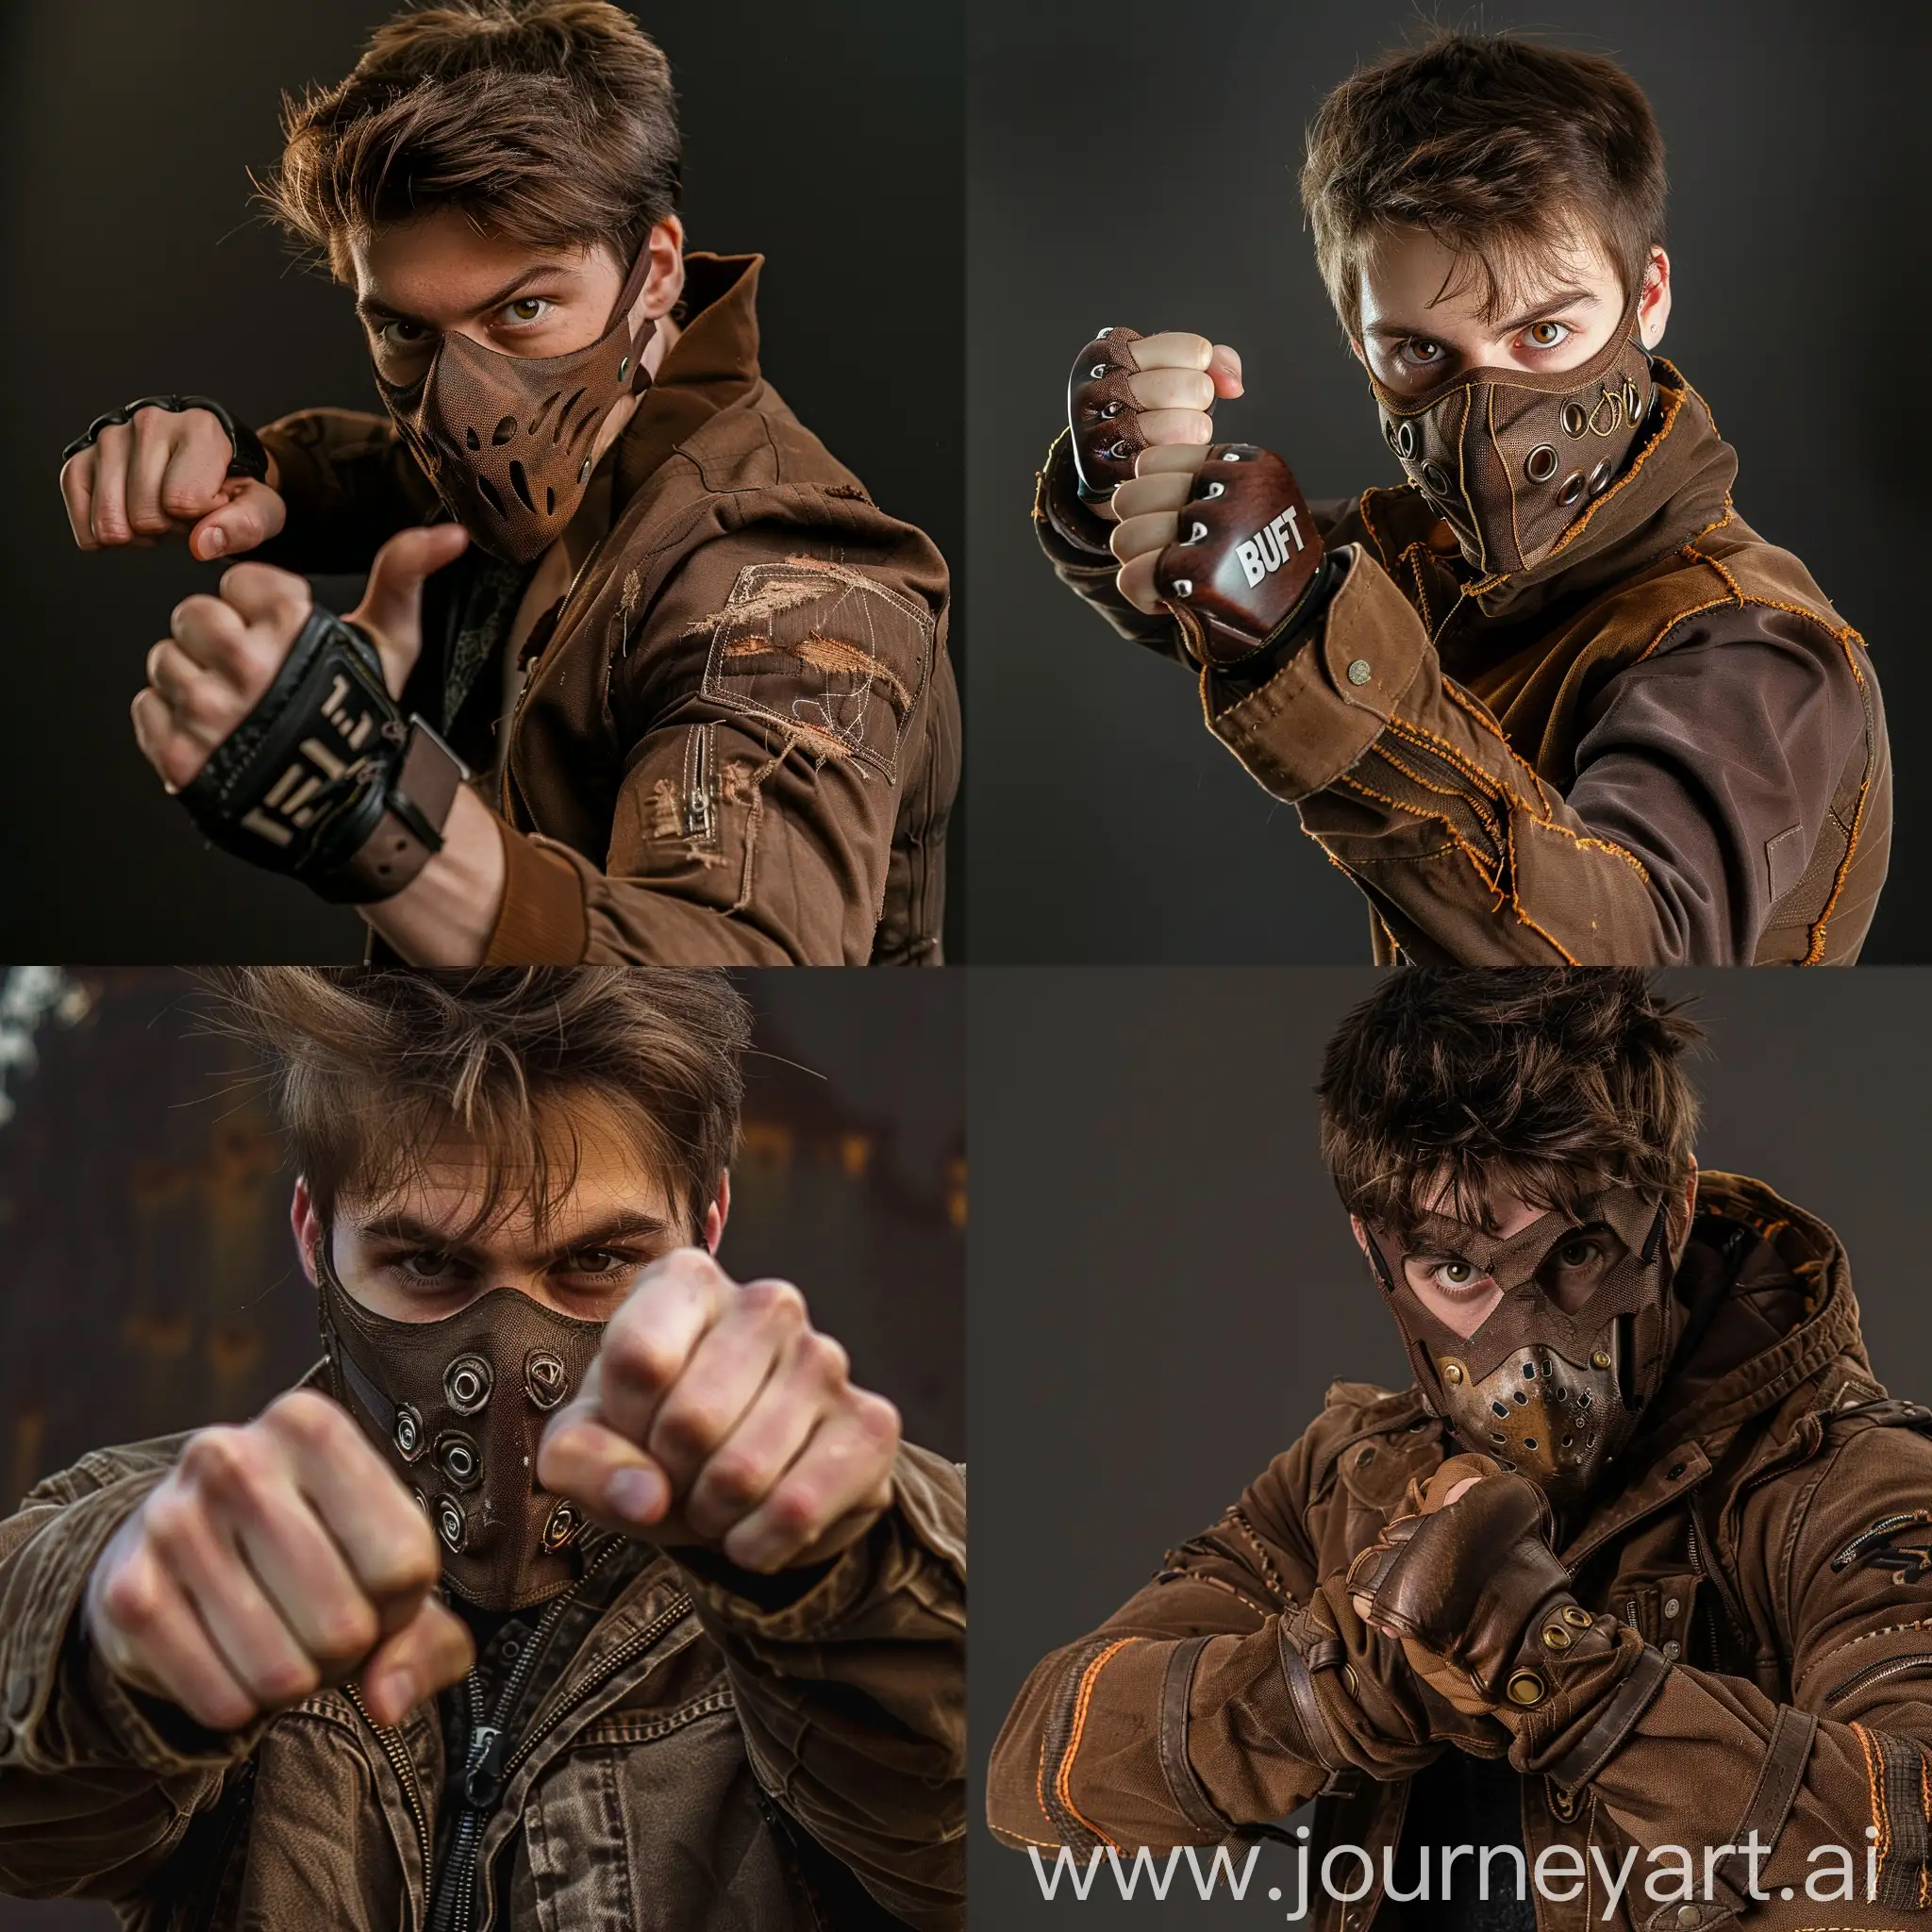 Man with brown hairs and eyes in brown jacket and mask with knuckles in fight pose